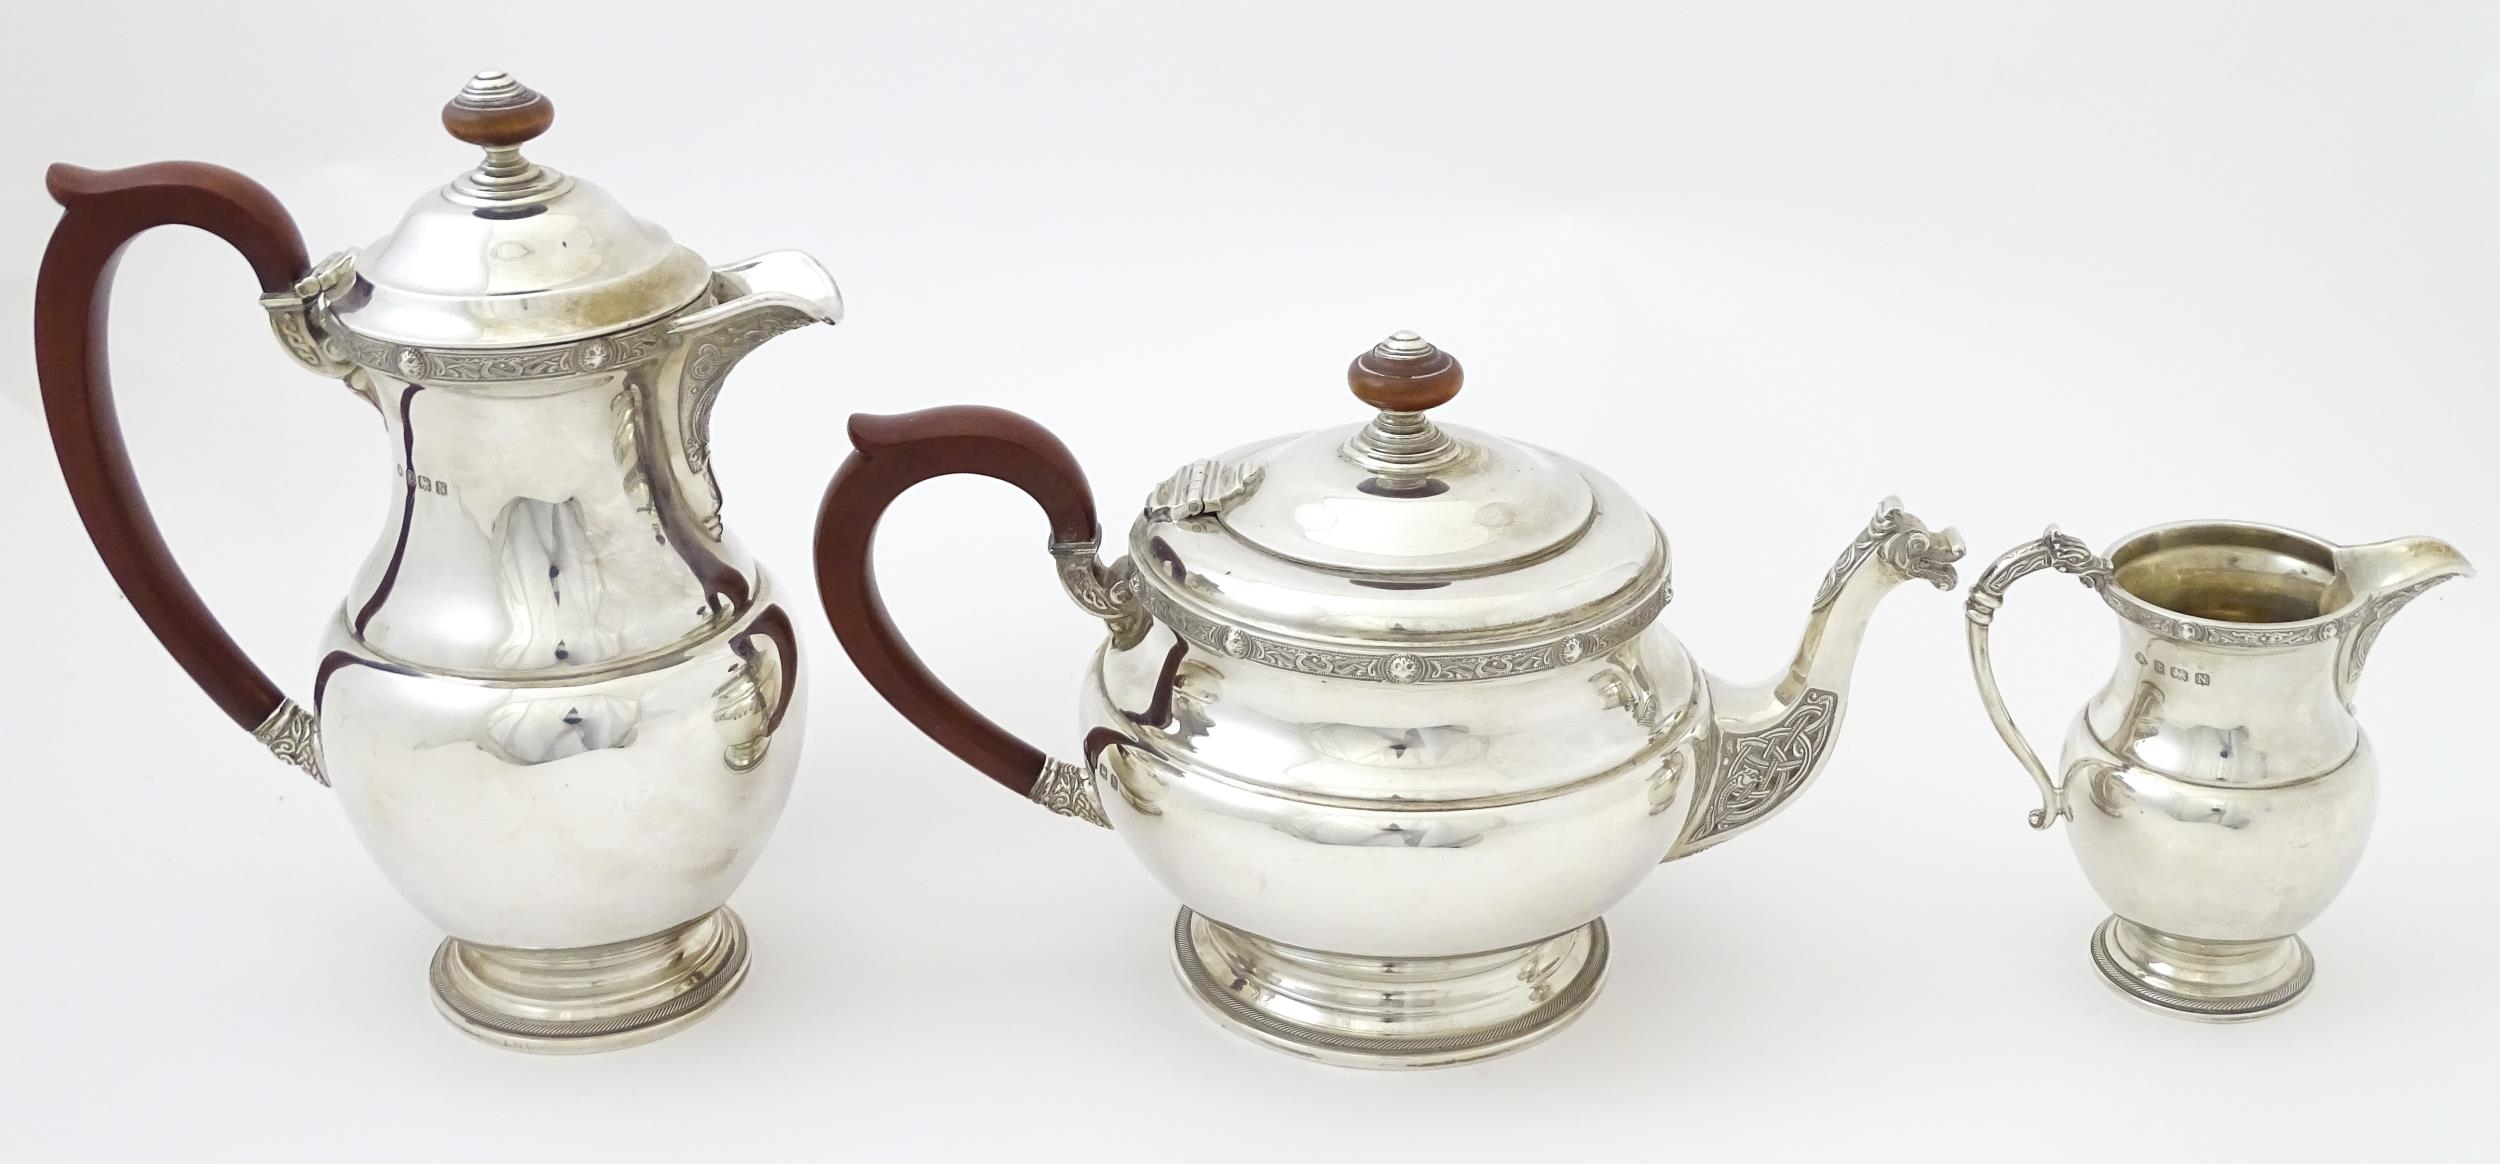 A three piece silver tea set comprising teapot, hot water pot and cream jug, with Celtic style